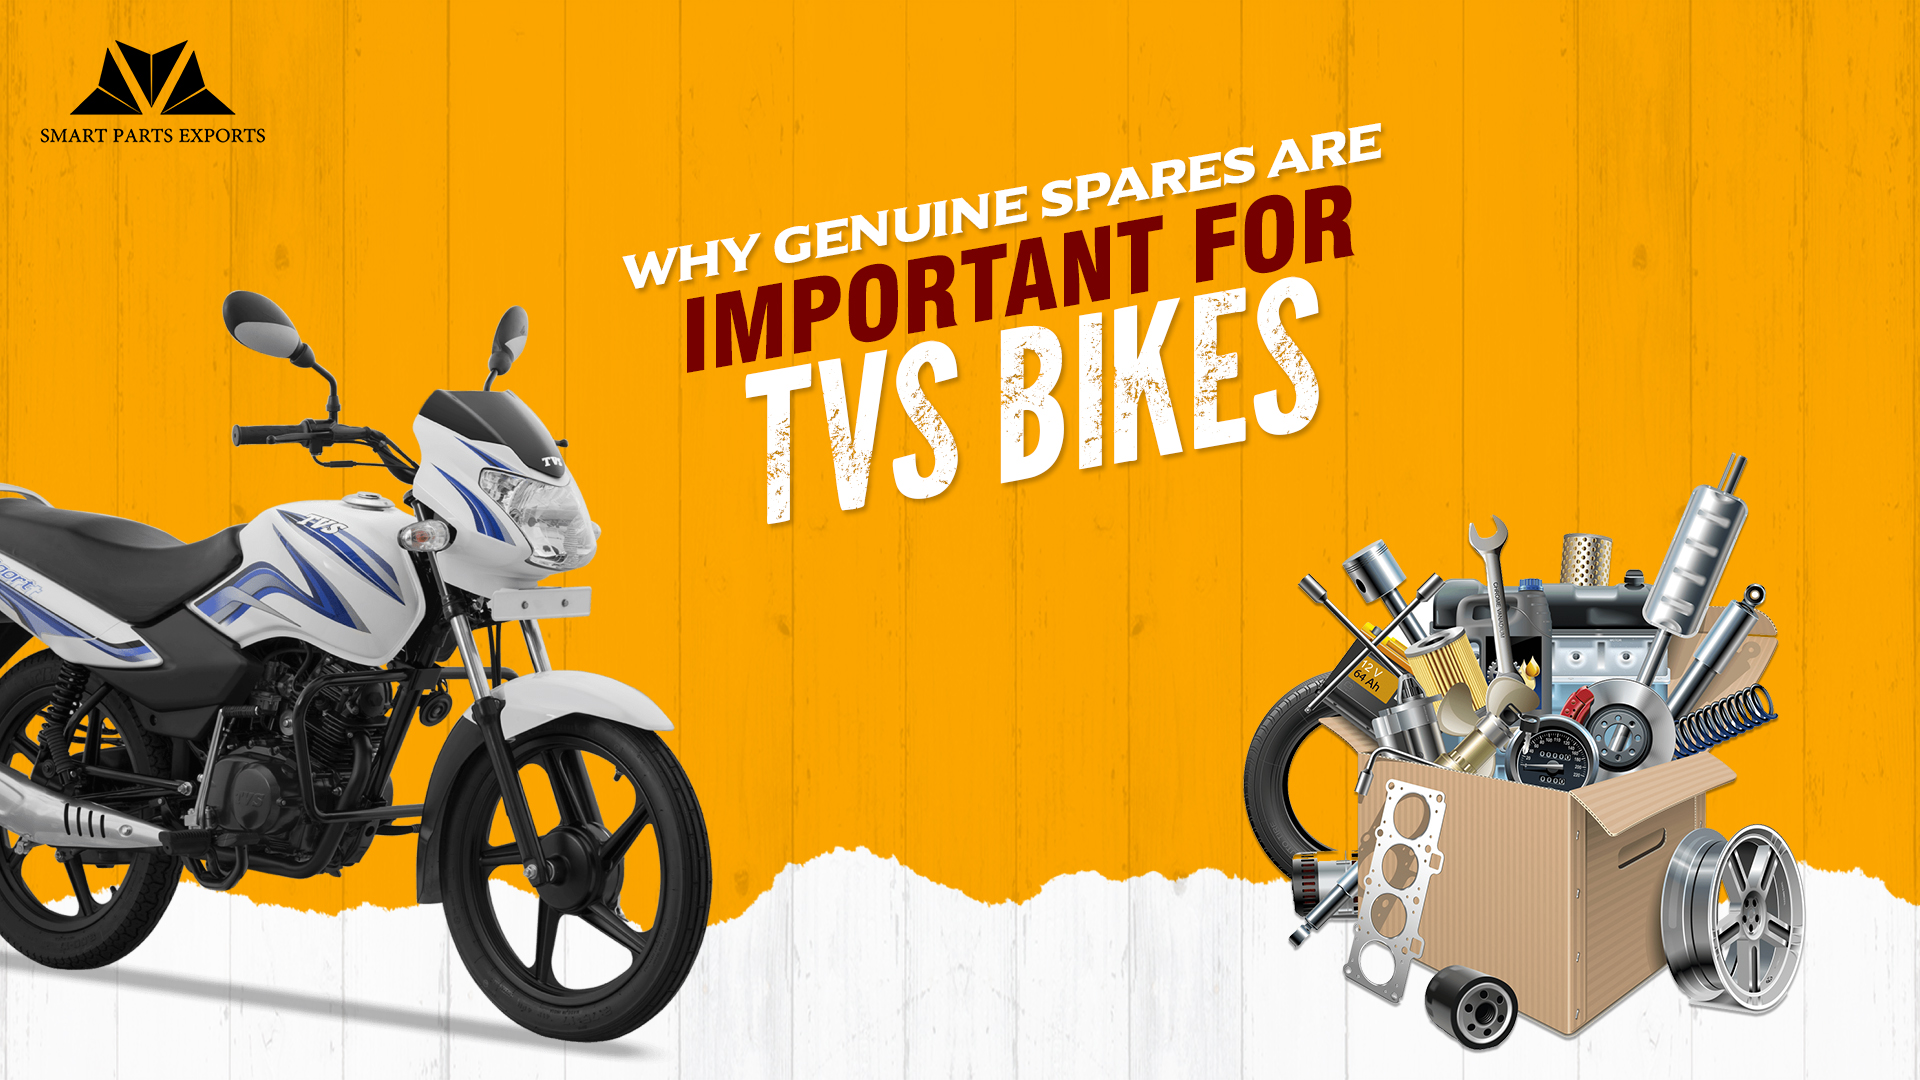 Why TVS Genuine Spare Parts are Important - Smart Parts Exports